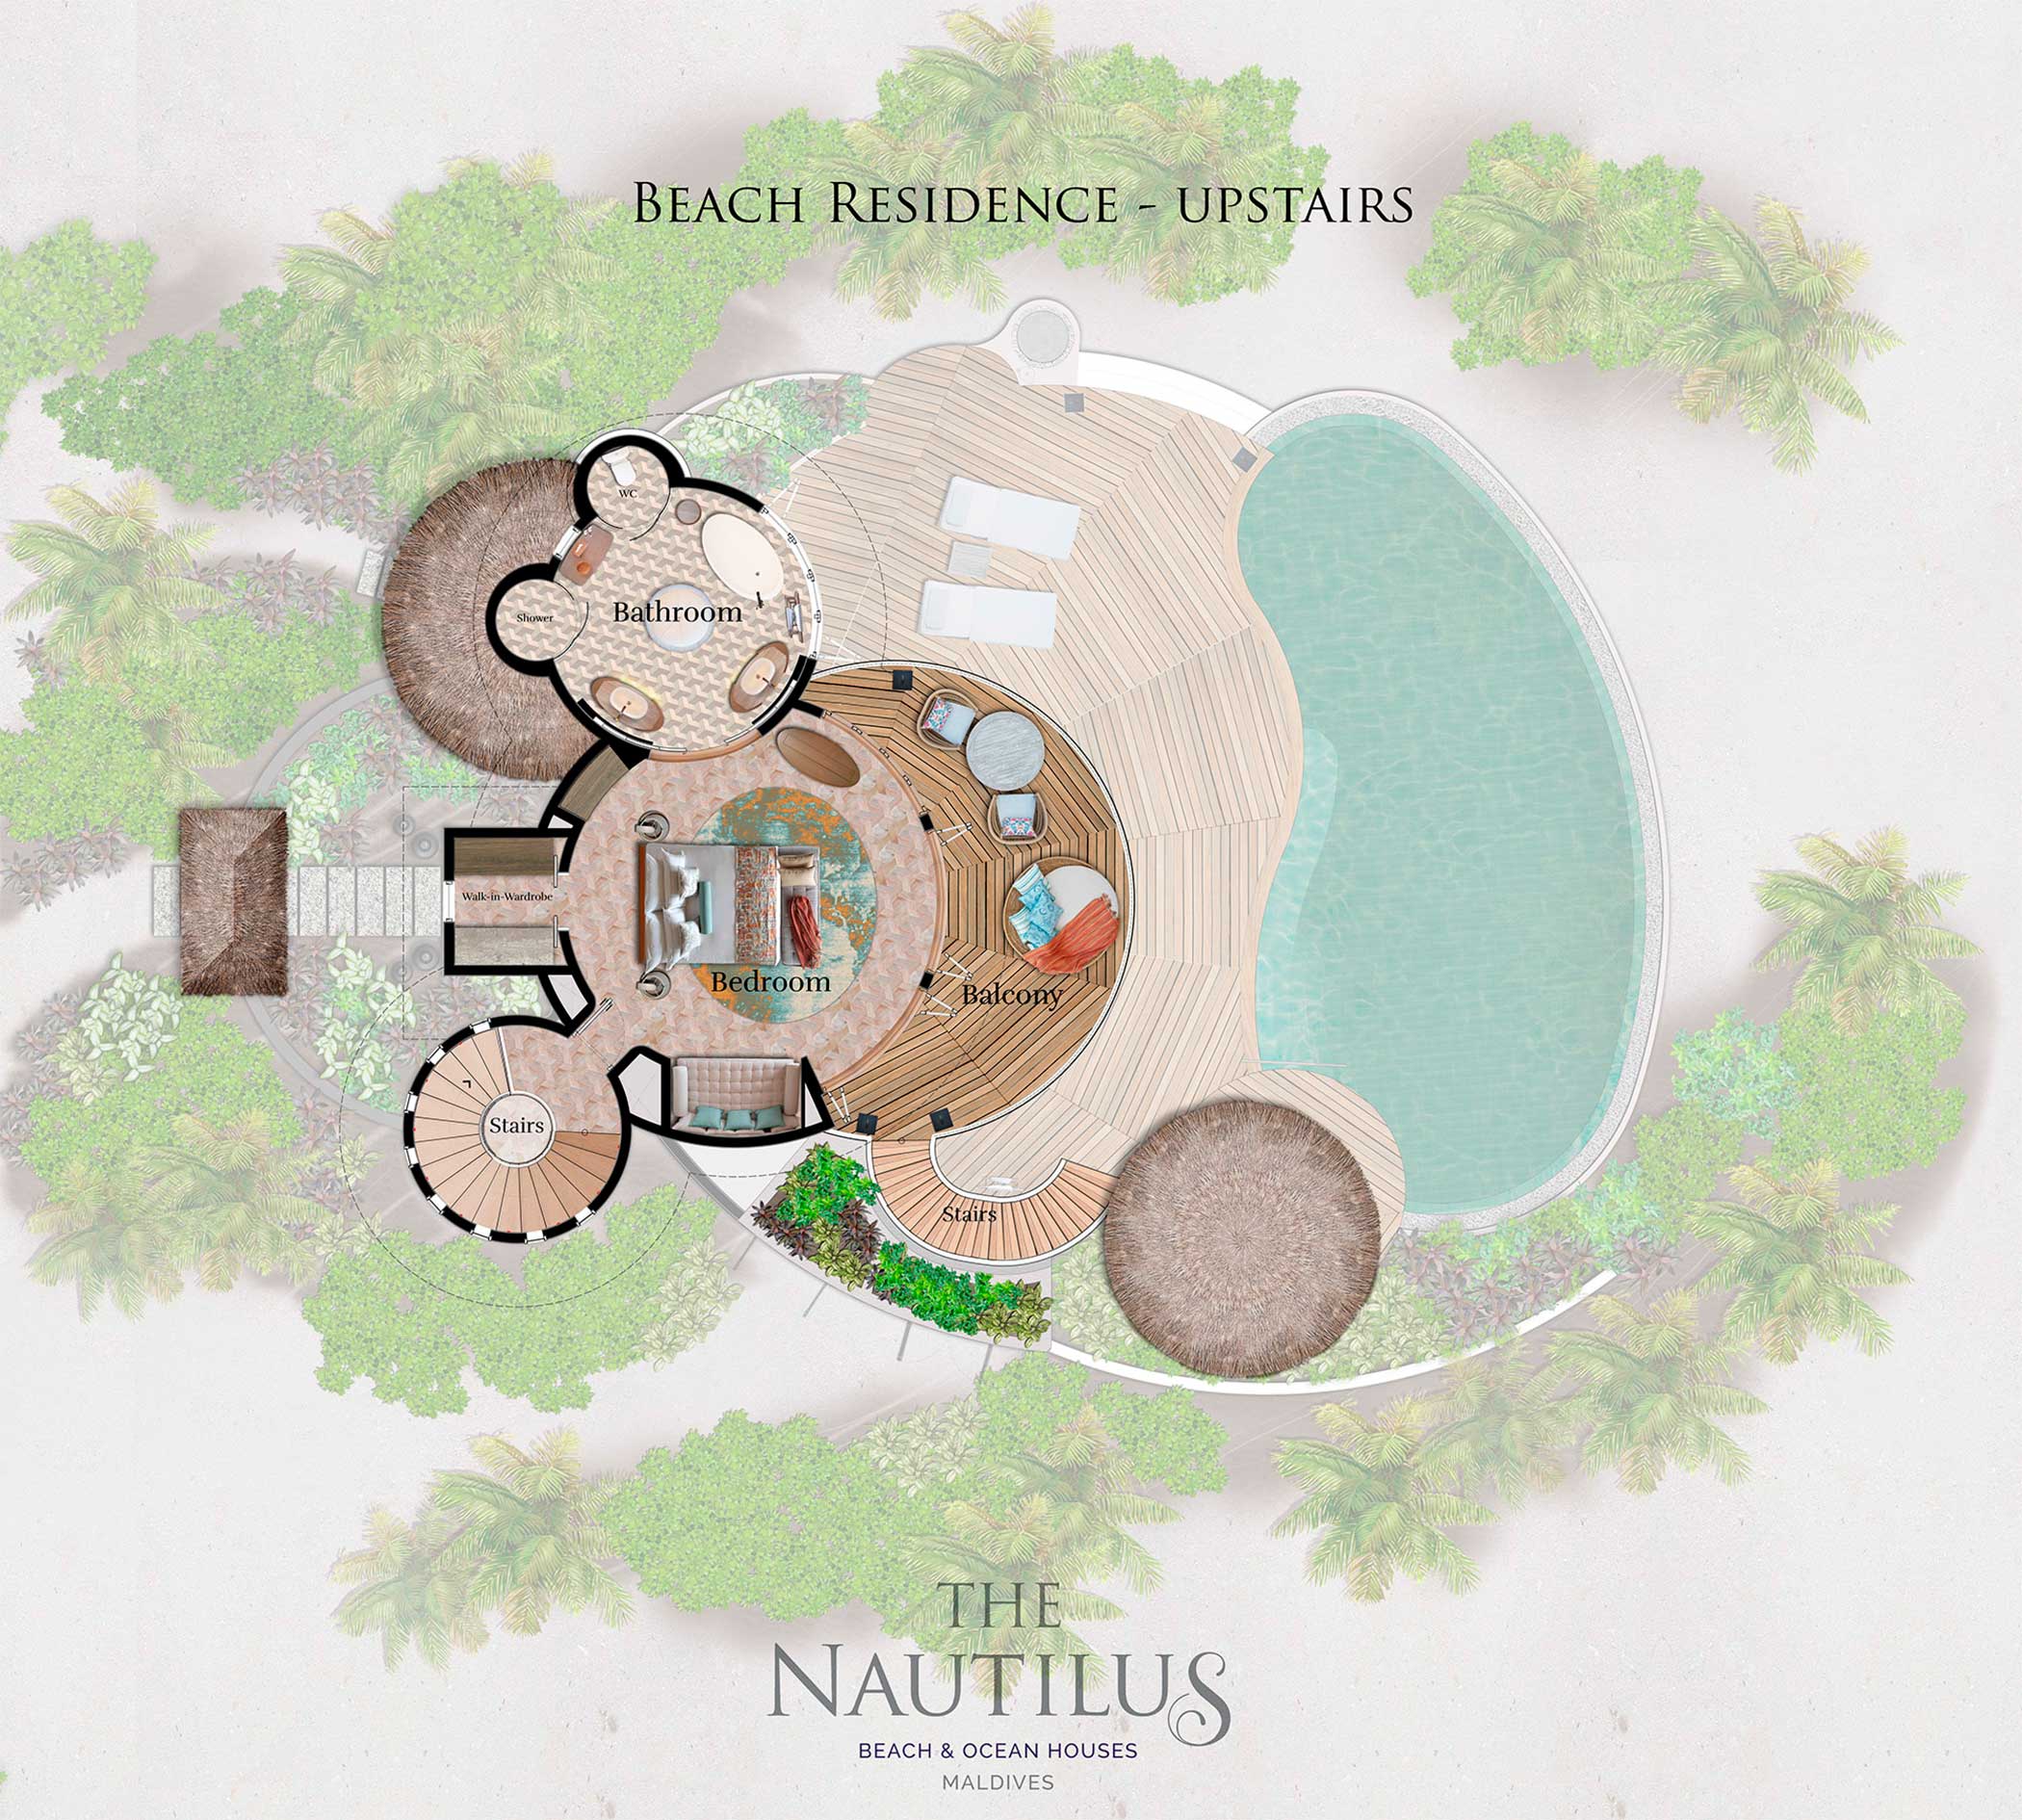 Beach residence with private pool plan upstairs